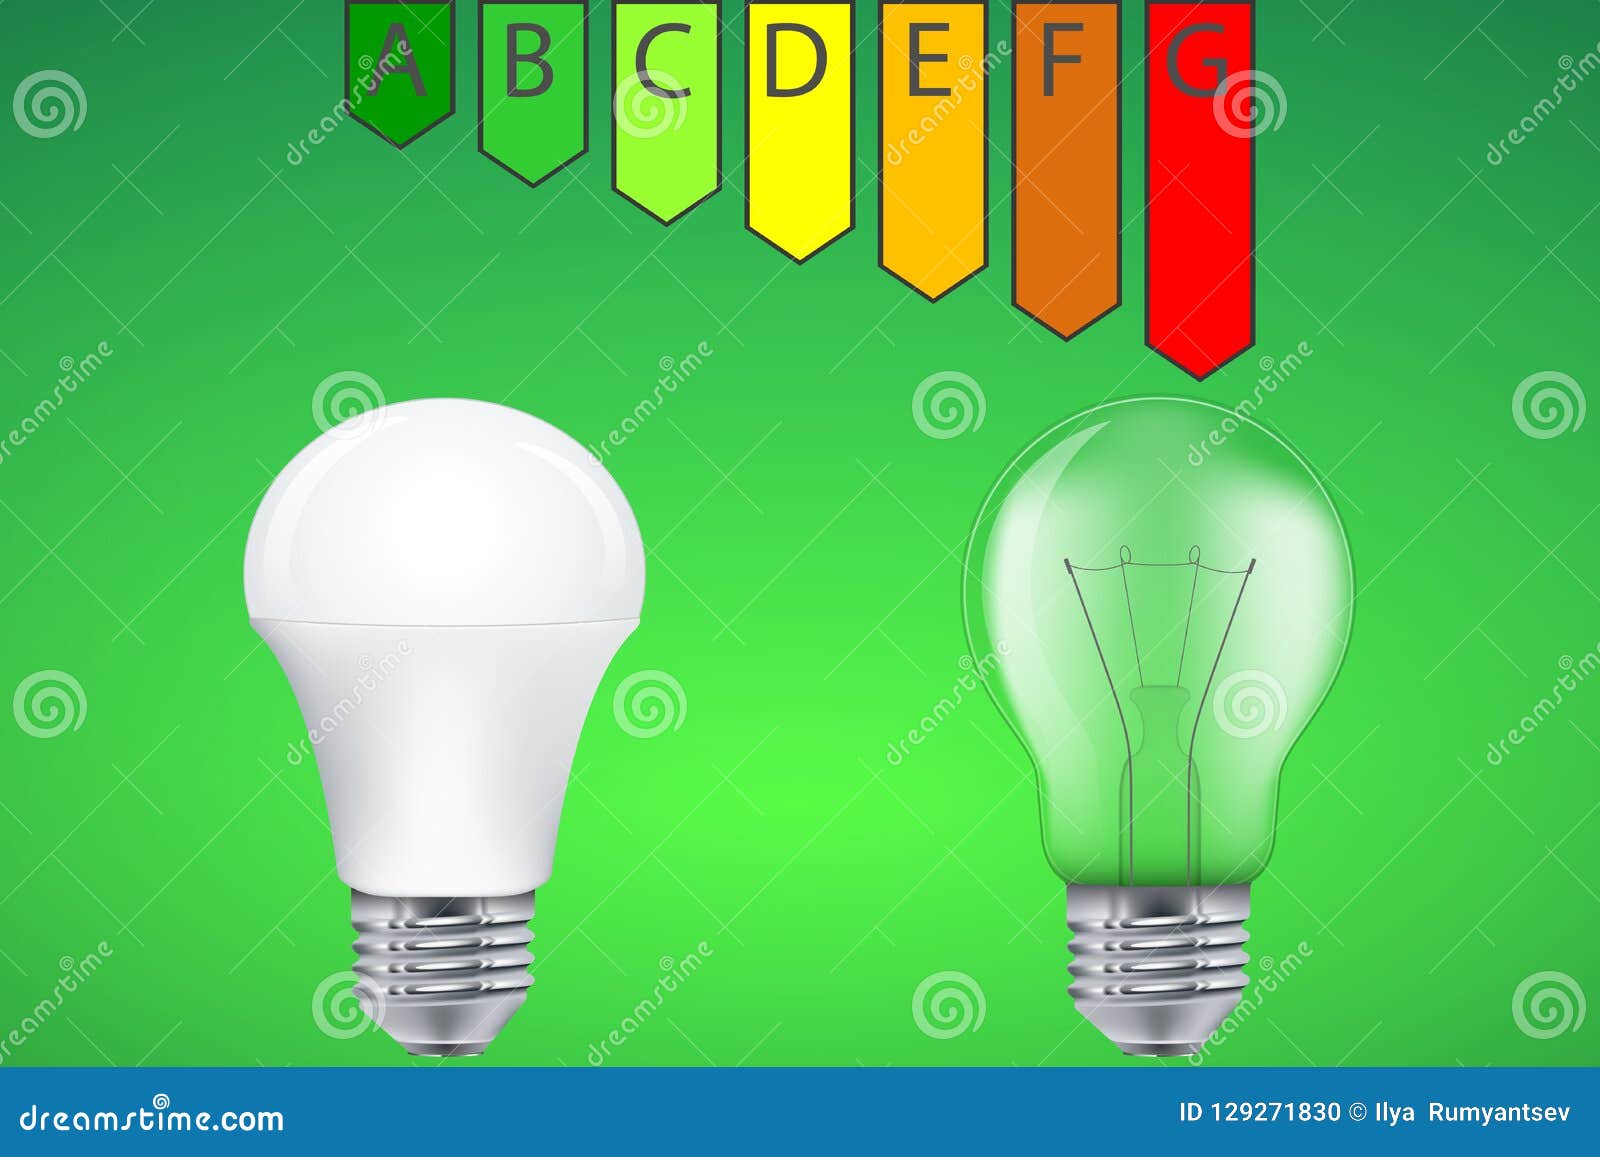 Energy Efficiency Of LED Light Bulb And Incandescent Lamp Stock Vector